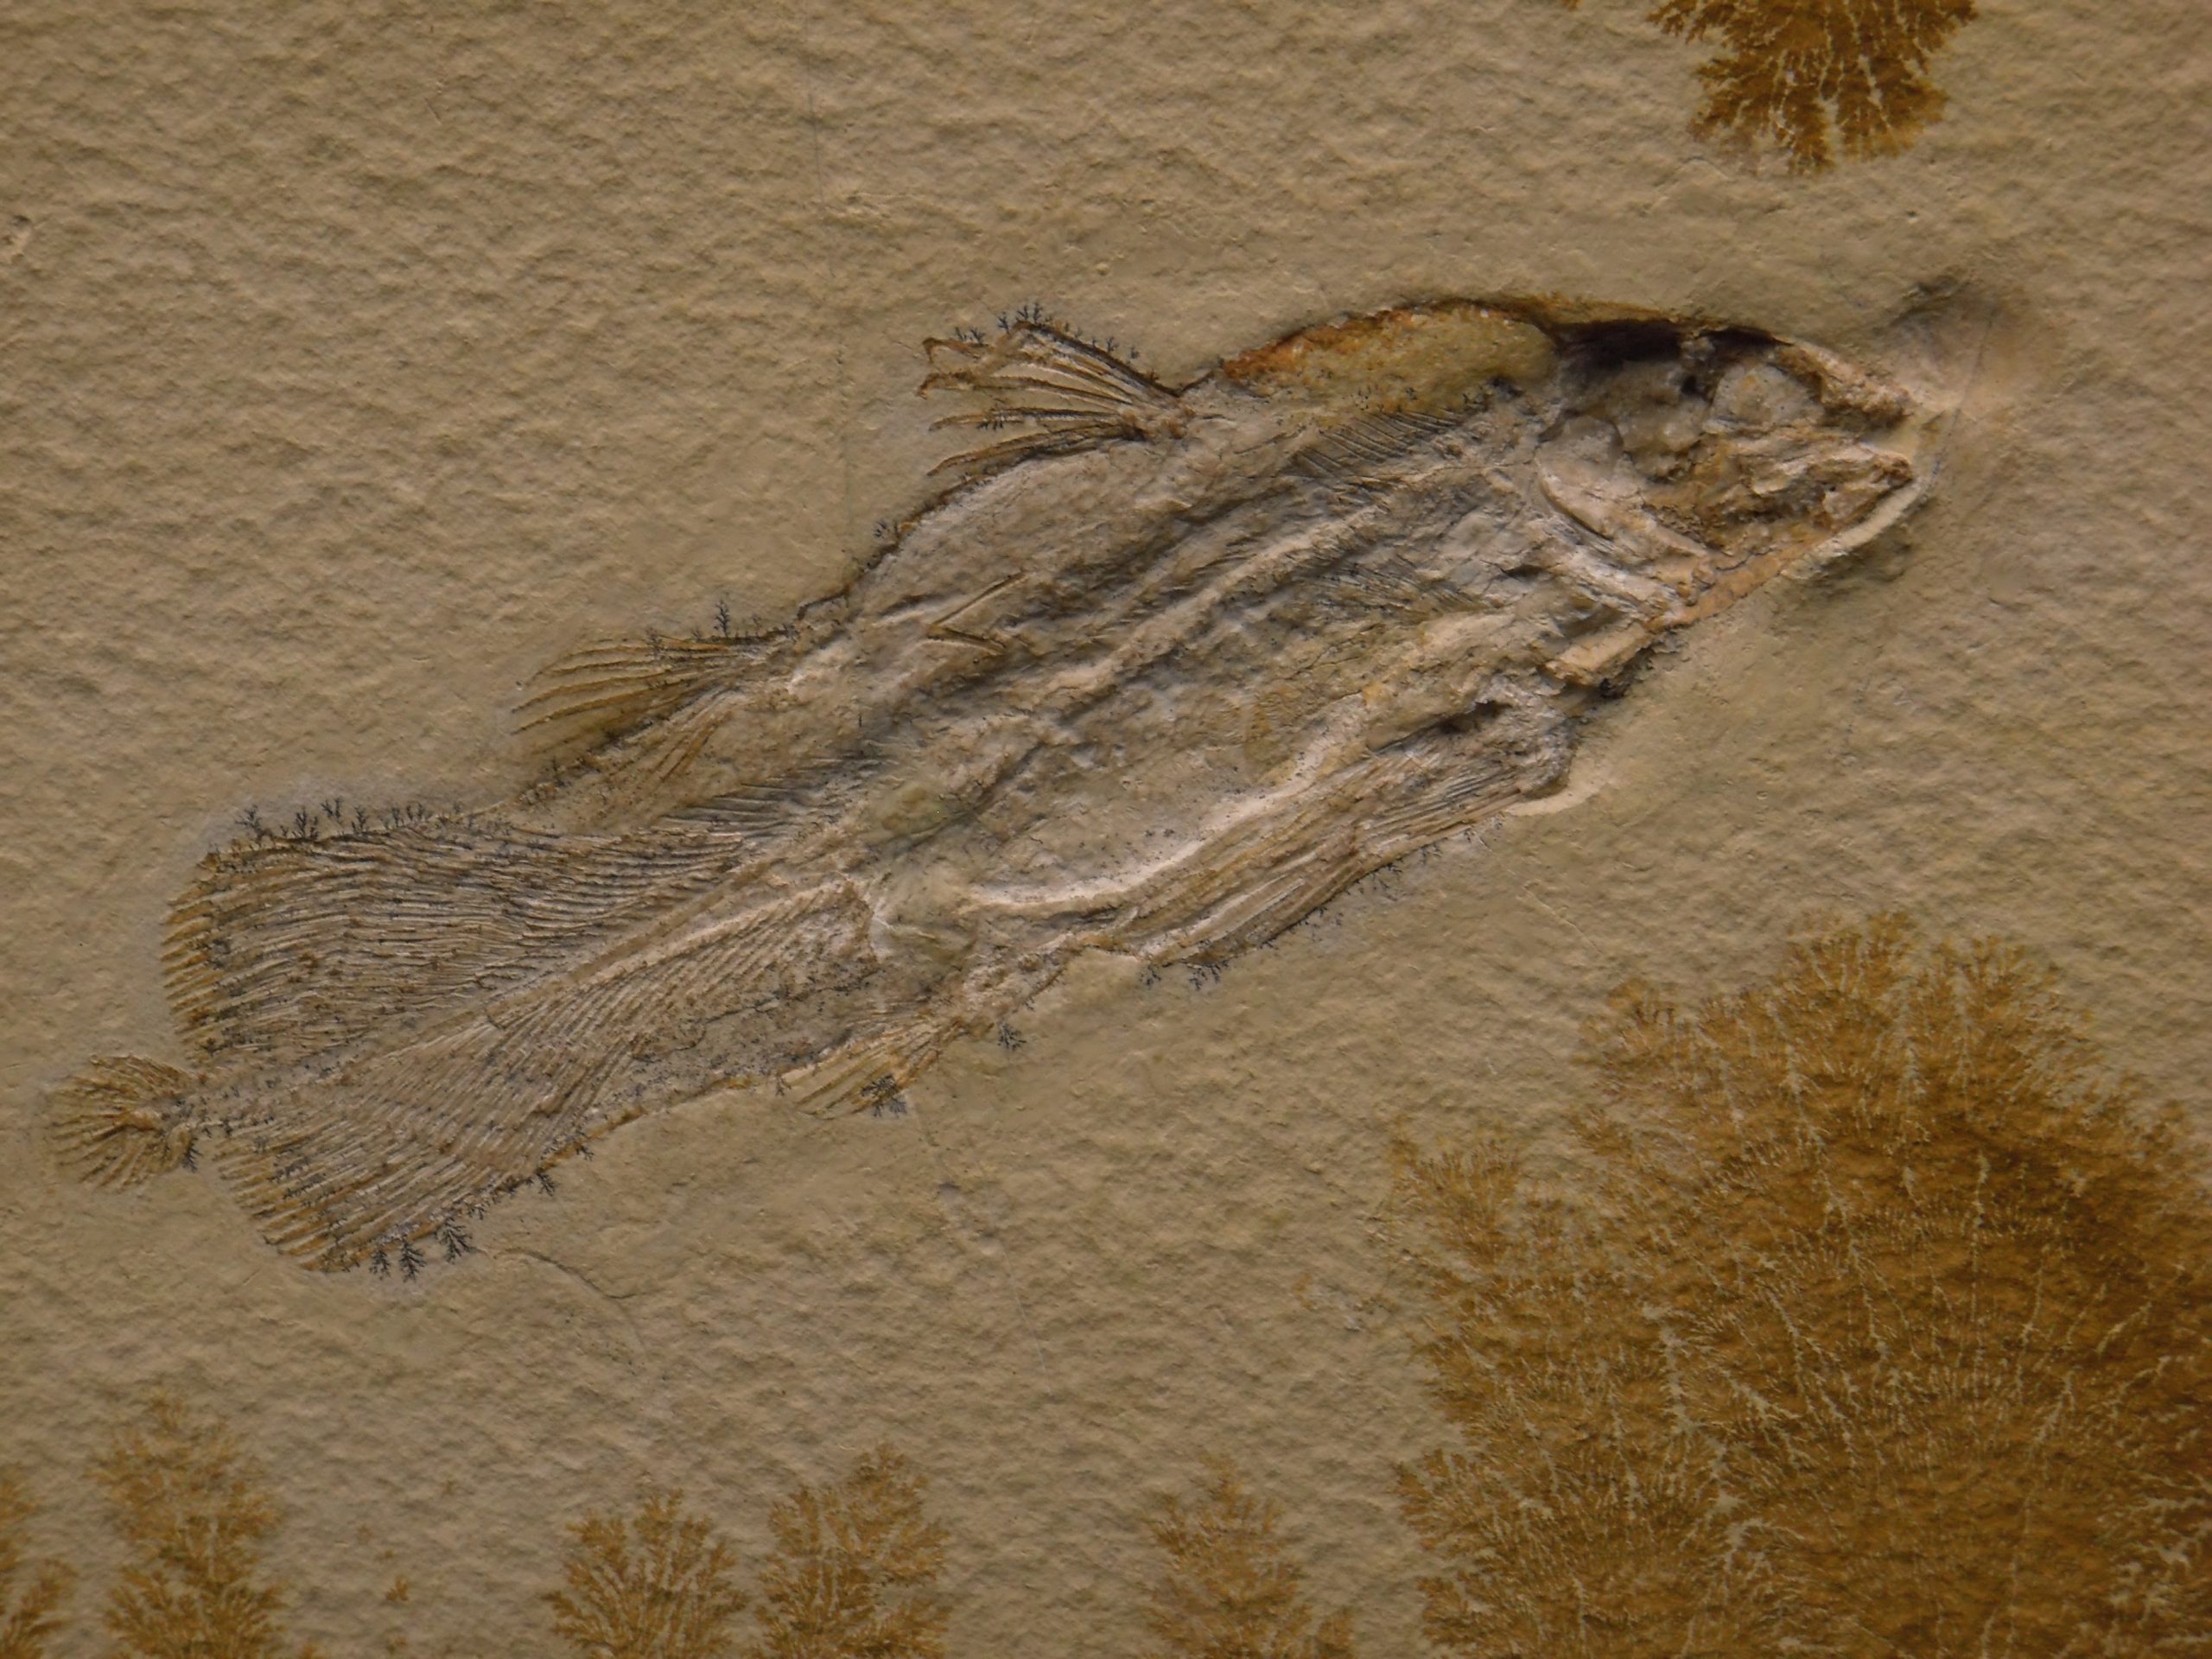 Image of a fossilized coelacanth from millions of years ago.